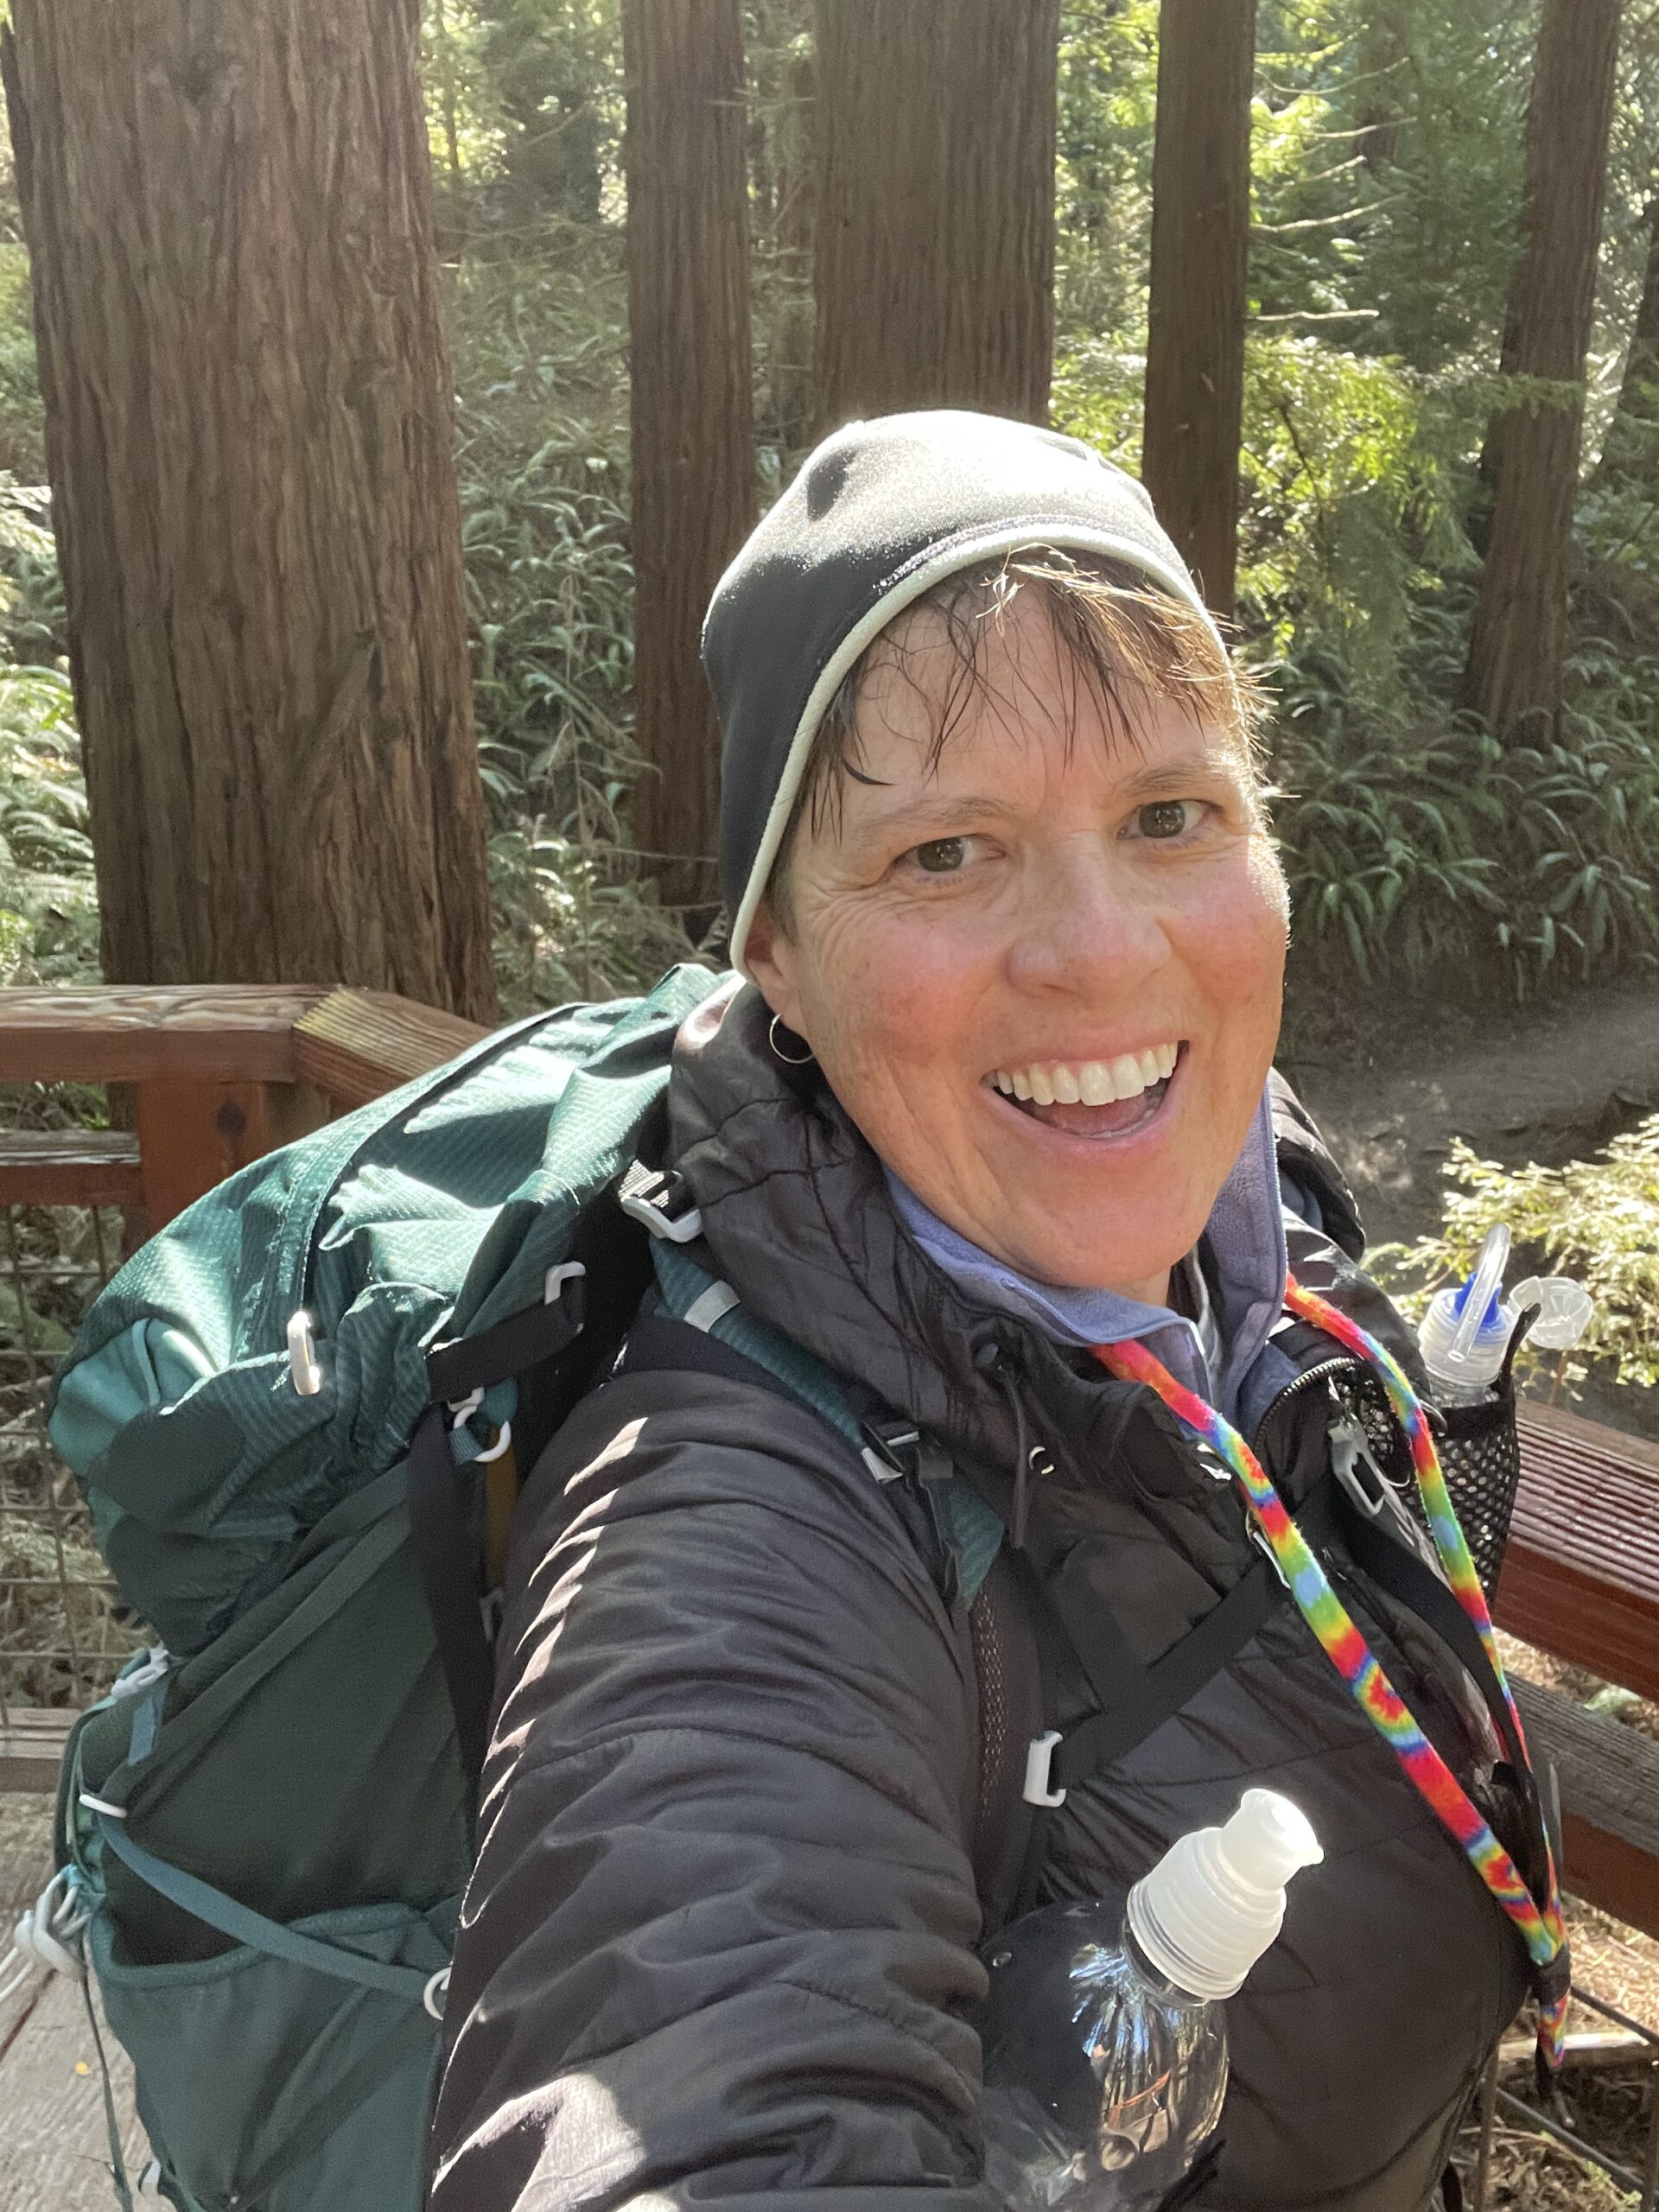 My PCT Hike, a Journey of Awe and Gratefulness